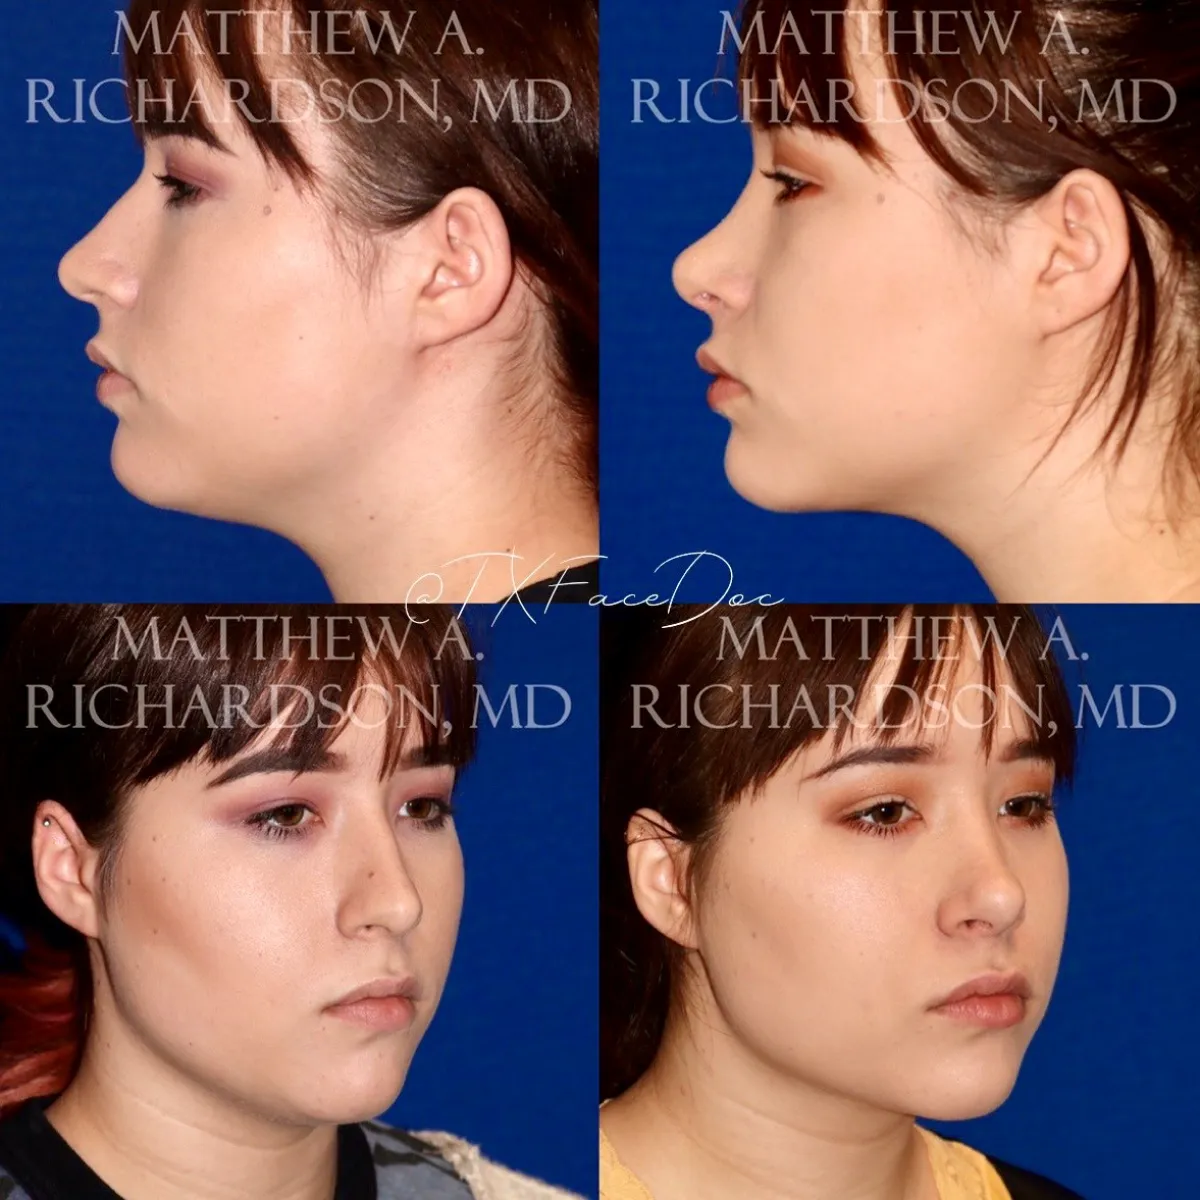 Neck Liposuction Before and After Performed by Matthew A. Richardson, MD